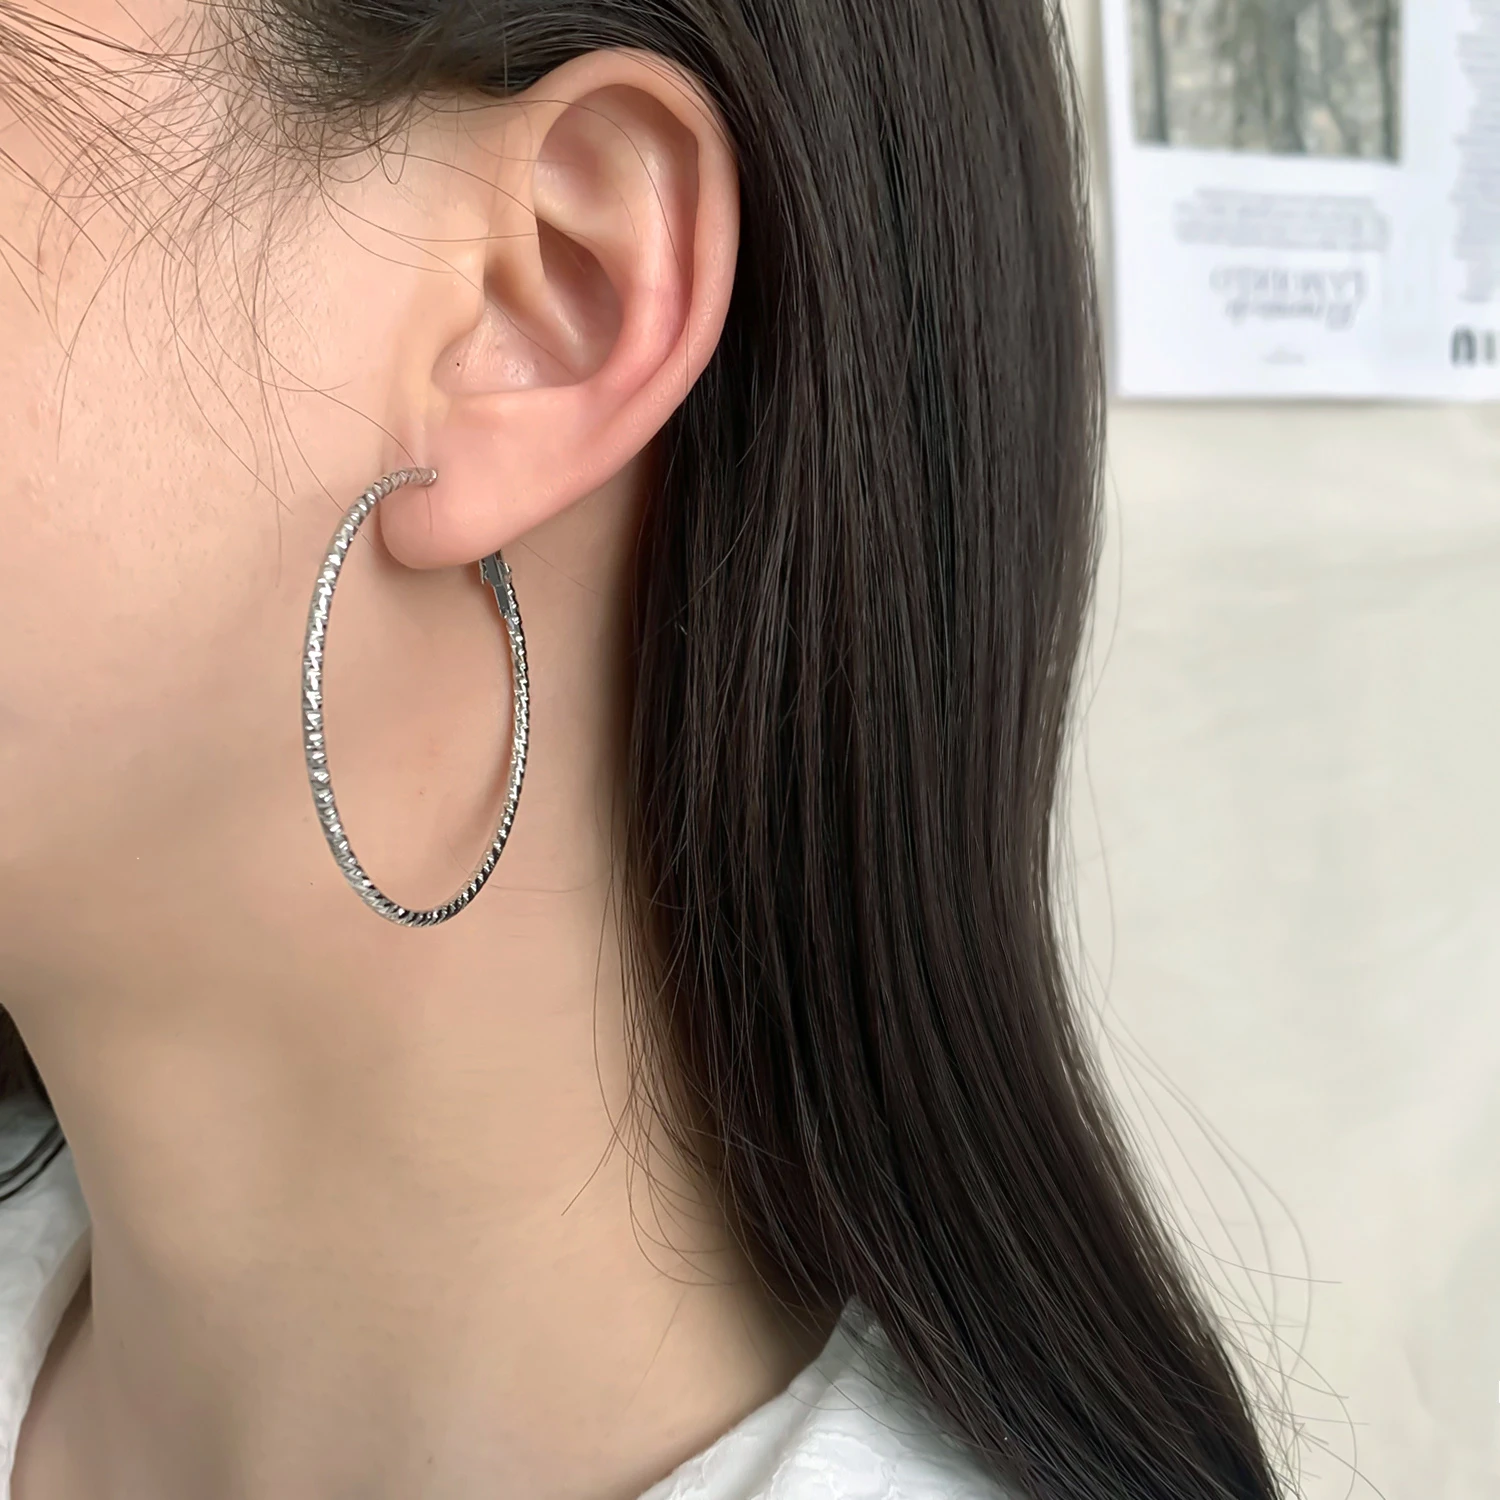 Exaggerated Big Thin Hoop Earrings For Women Simple Shiny Starry Large Circle Earrings Party Jewelry Boucles d'oreill